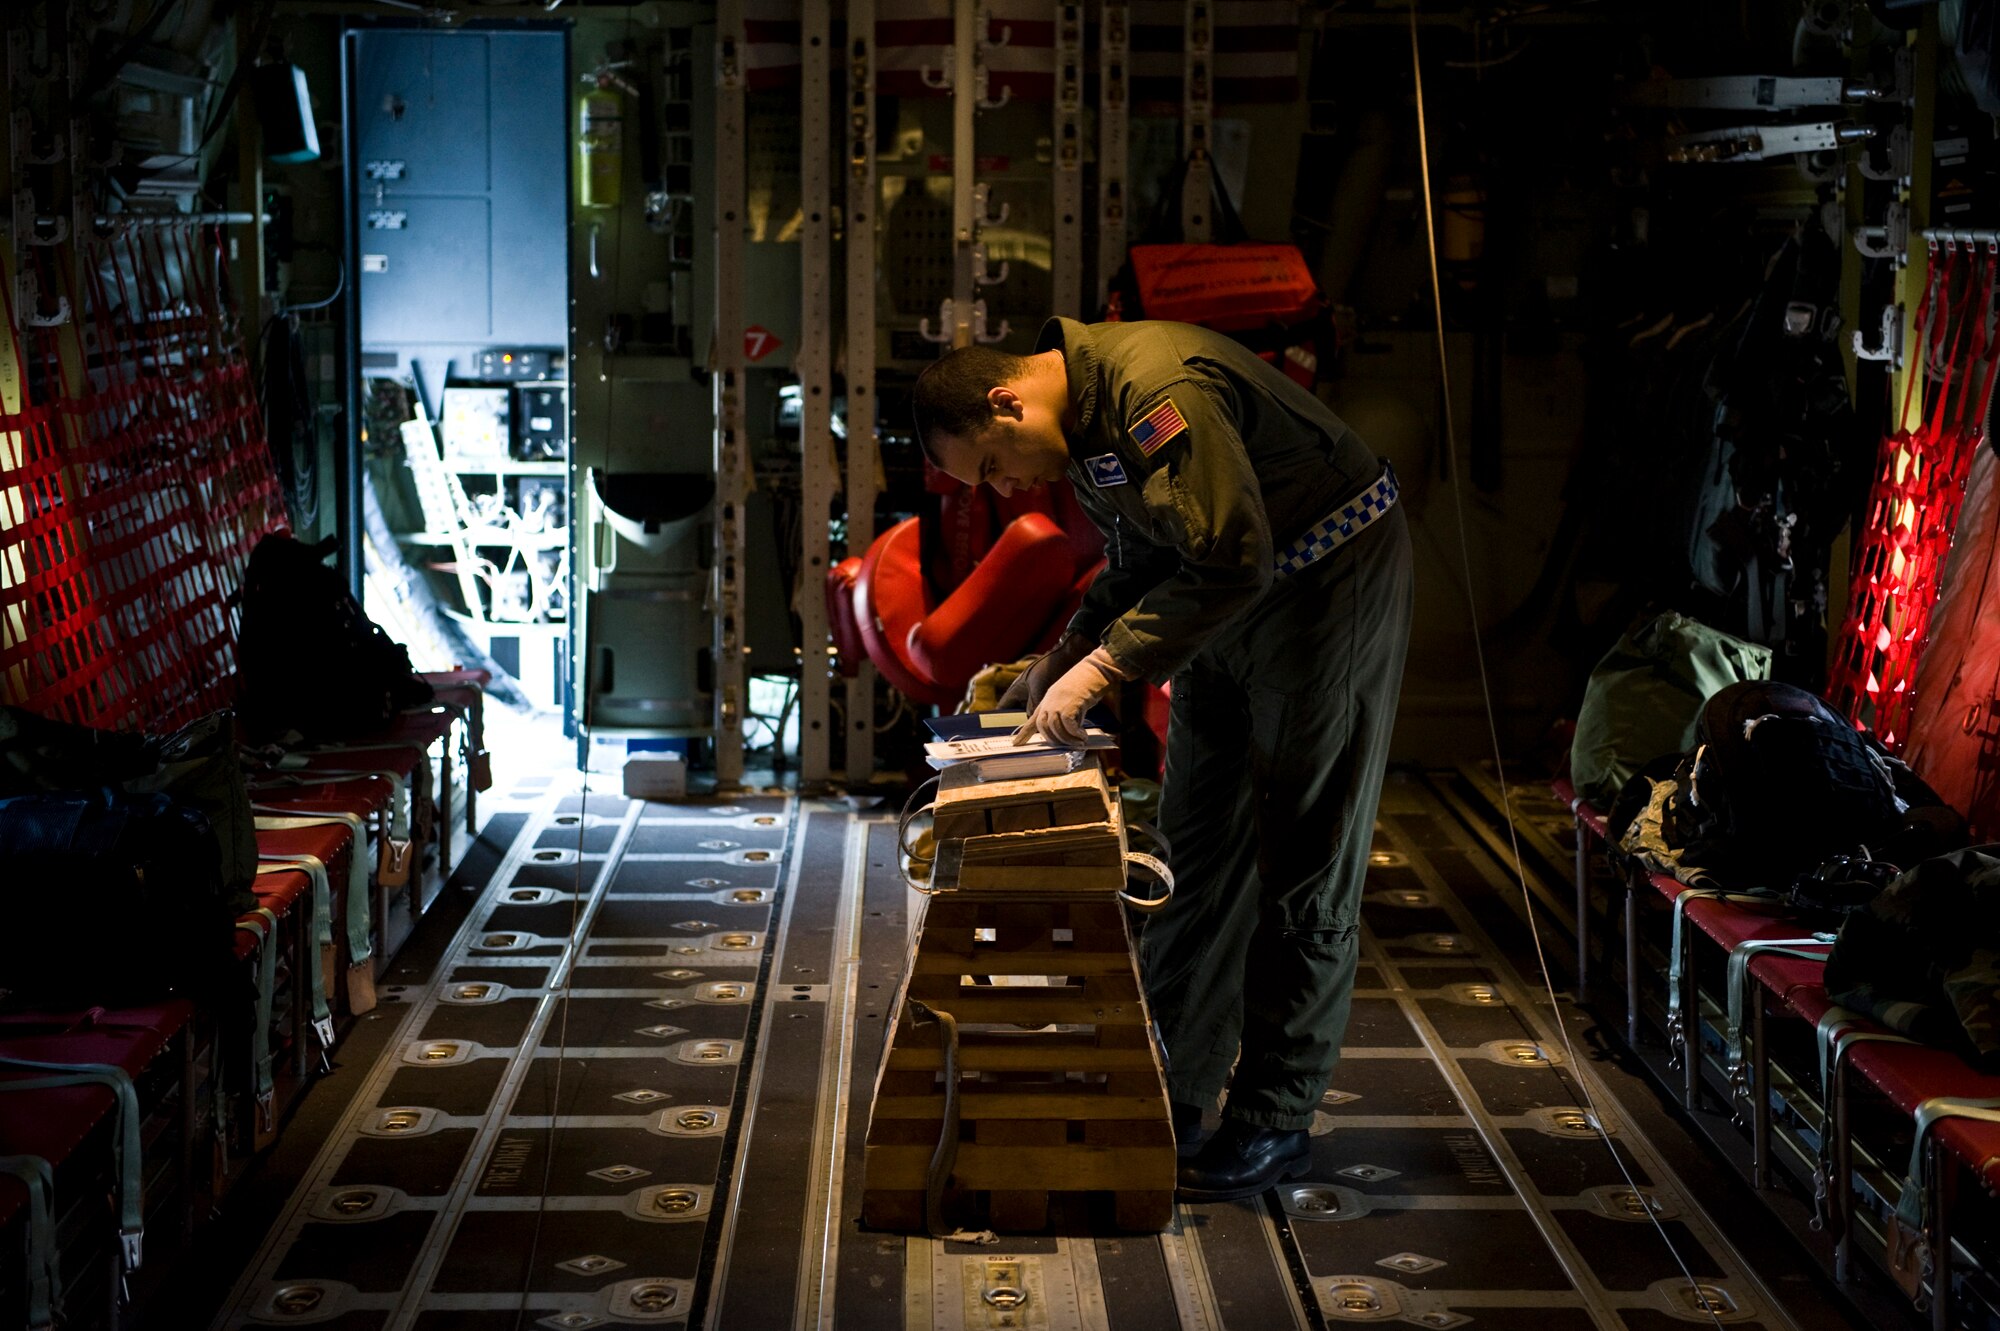 U.S. Air Force Senior Airman Dustin Franks, 37th Airlift Squadron, reviews the aircraft checklist of a C-130J Hercules, from Ramstein Air Base, Germany in preparation of an airdrop mission over the Marnheim, Germany drop zone, Feb. 10, 2011. The single C-130J aircraft from the 37th Airlift Squadron, 86th Airlift Wing dropped more than fifty service members at the drop site.  (U.S. Air Force photo/TSgt Wayne Clark, AFNE Regional News Bureau) (Released)